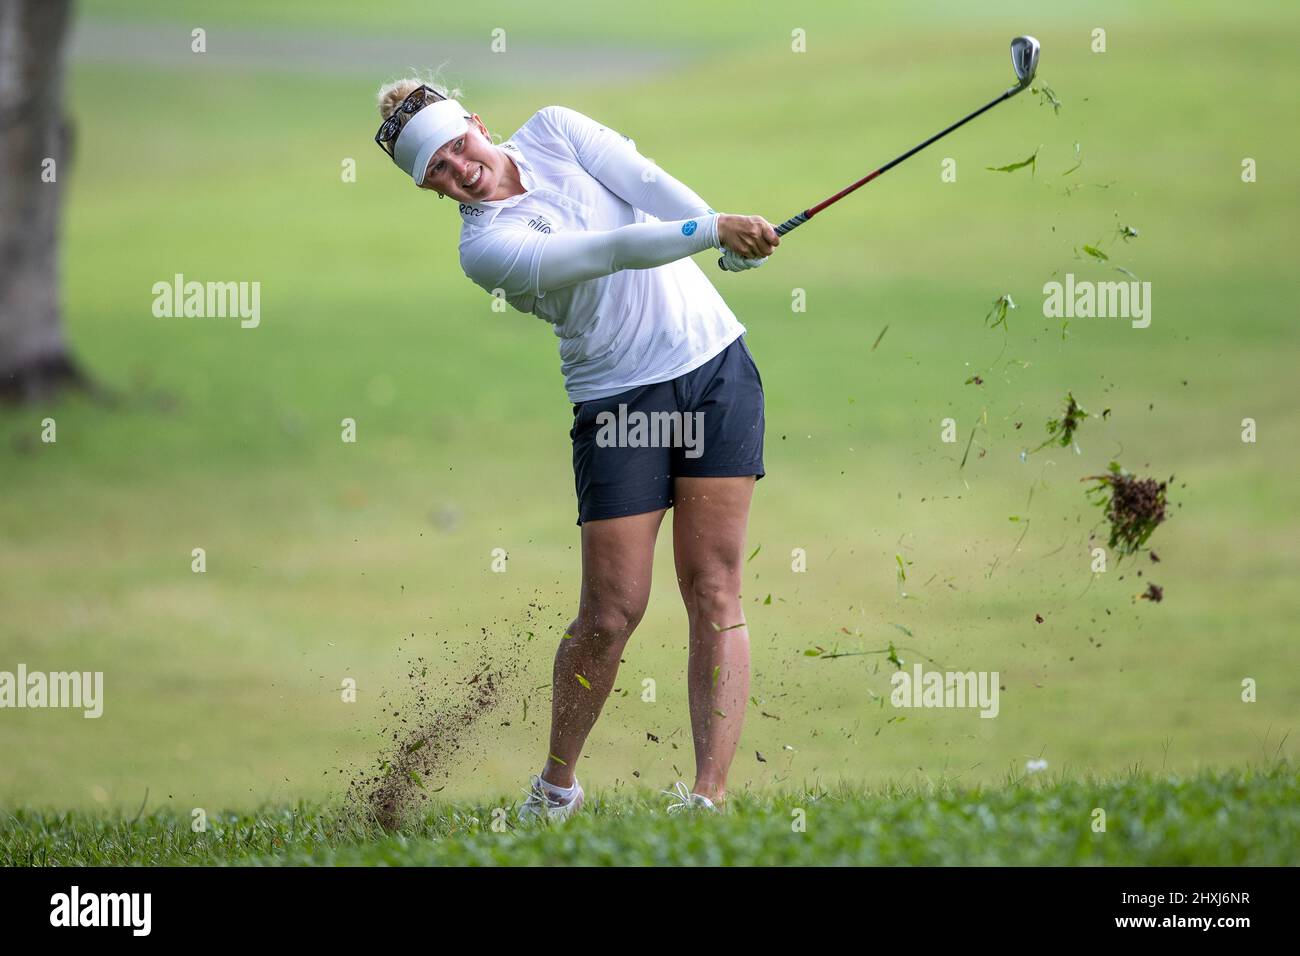 Pattaya Thailand - March 13: Nanna Koerstz Madsen from Denmark during the 4th and final day of The Honda LPGA Thailand at Siam Country Club Old Course on March 13, 2022 in Pattaya, Thailand (Photo by Peter van der Klooster/Orange Pictures) Credit: Orange Pics BV/Alamy Live News Stock Photo